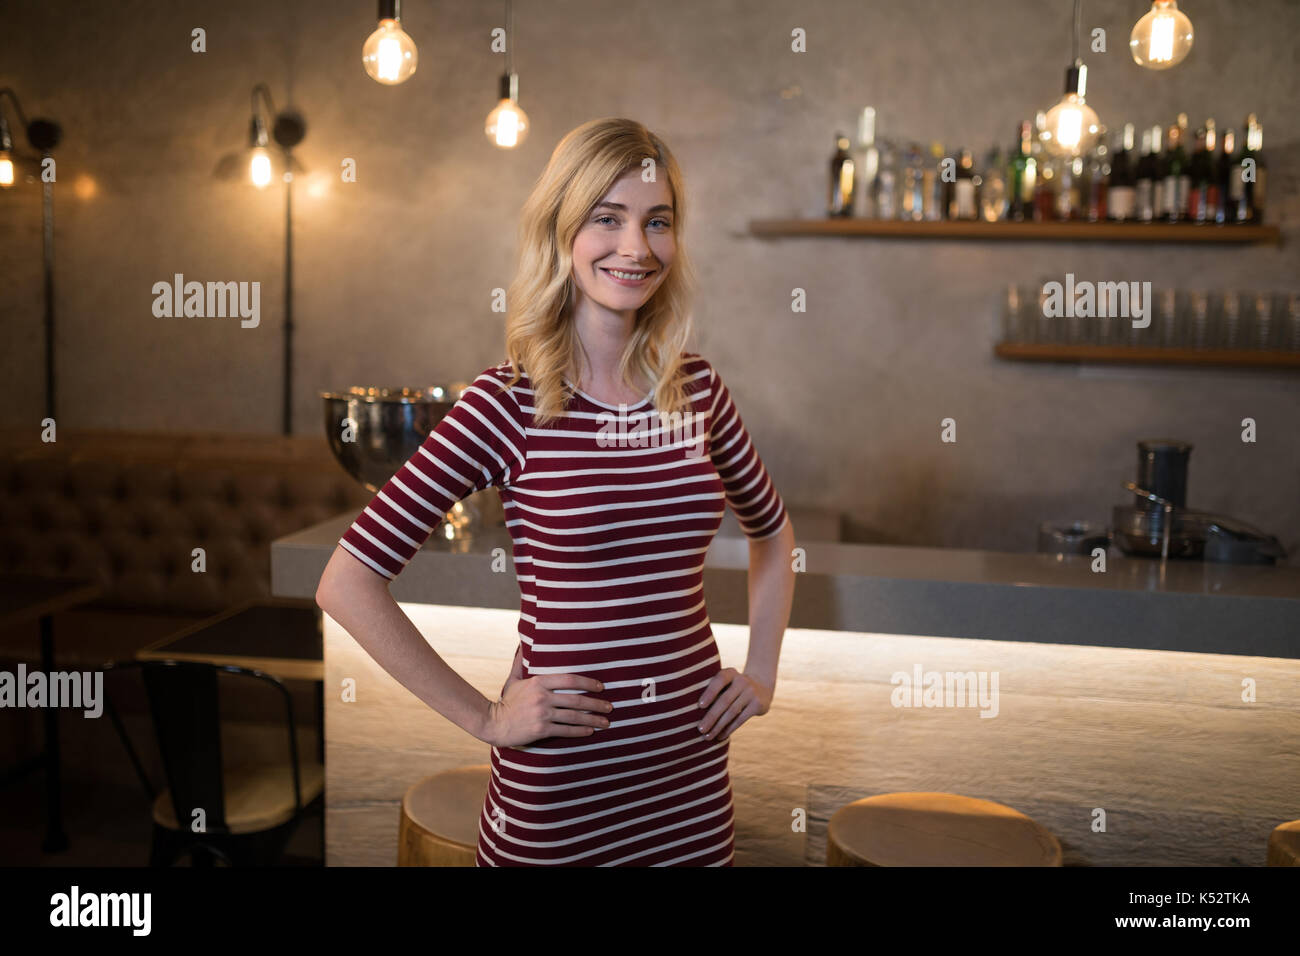 Portrait of beautiful woman standing with hands on hip at counter in resturant Stock Photo